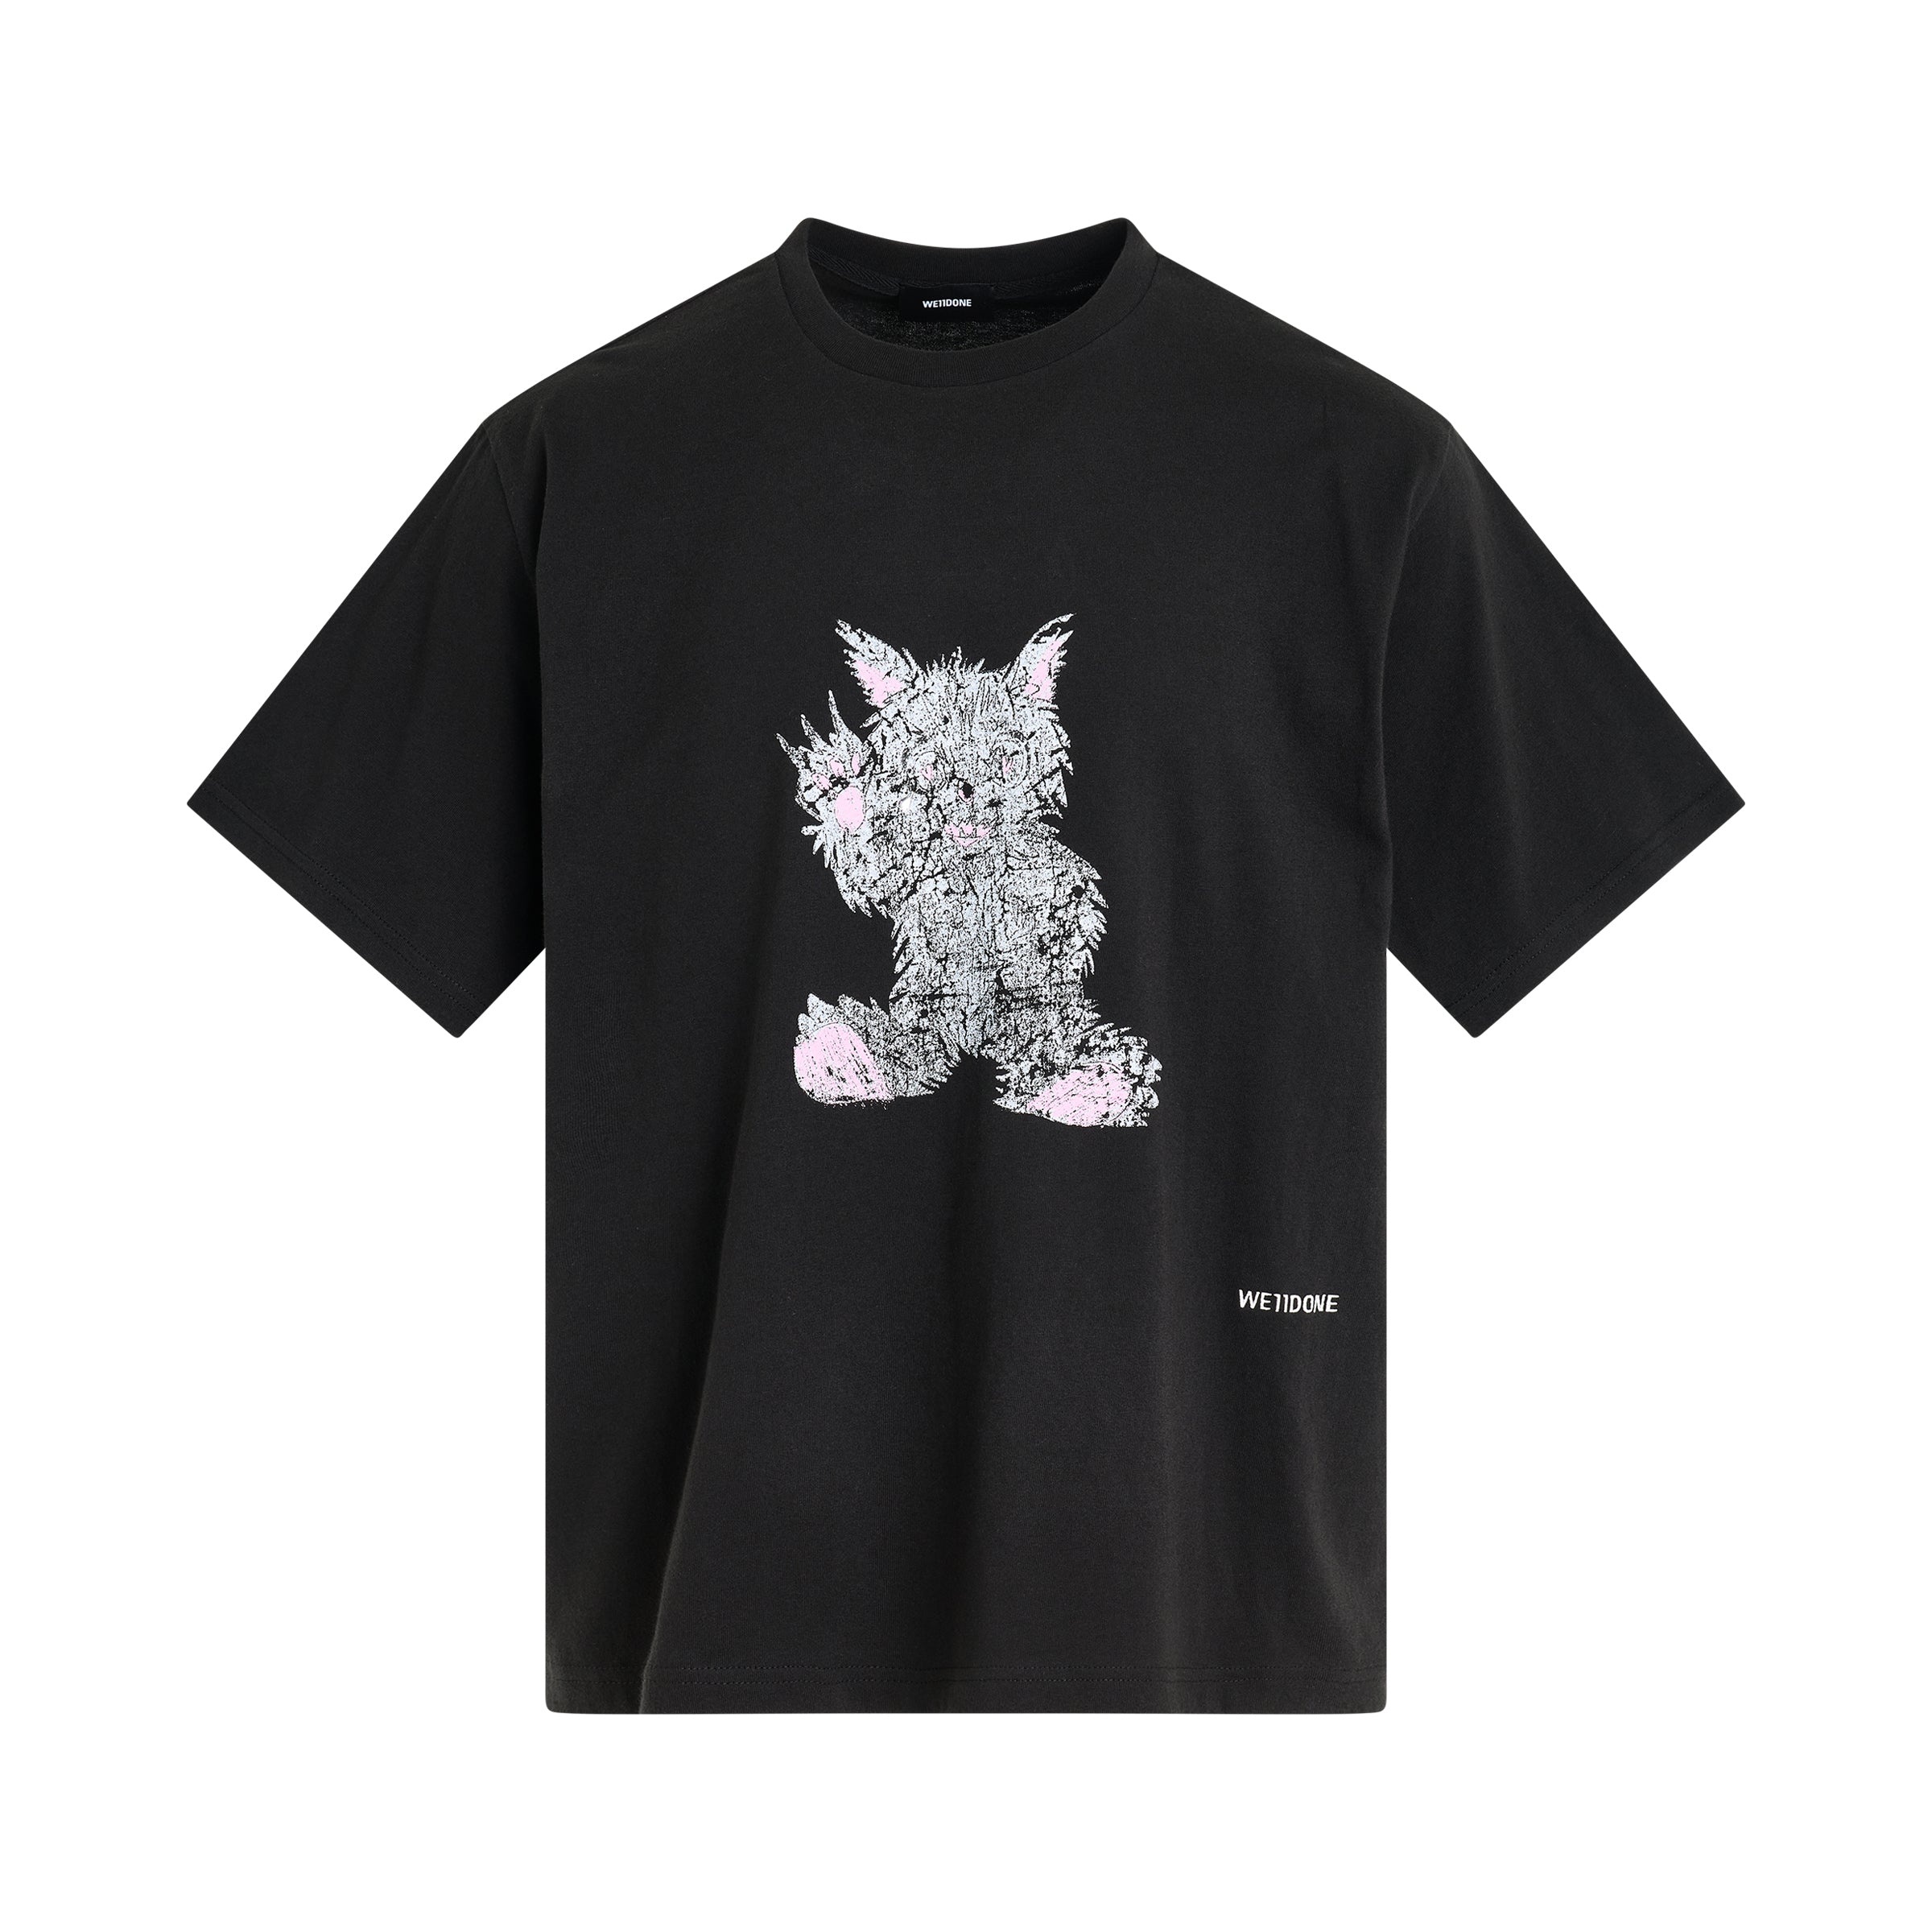 Washed Character T-Shirt in Black - 1